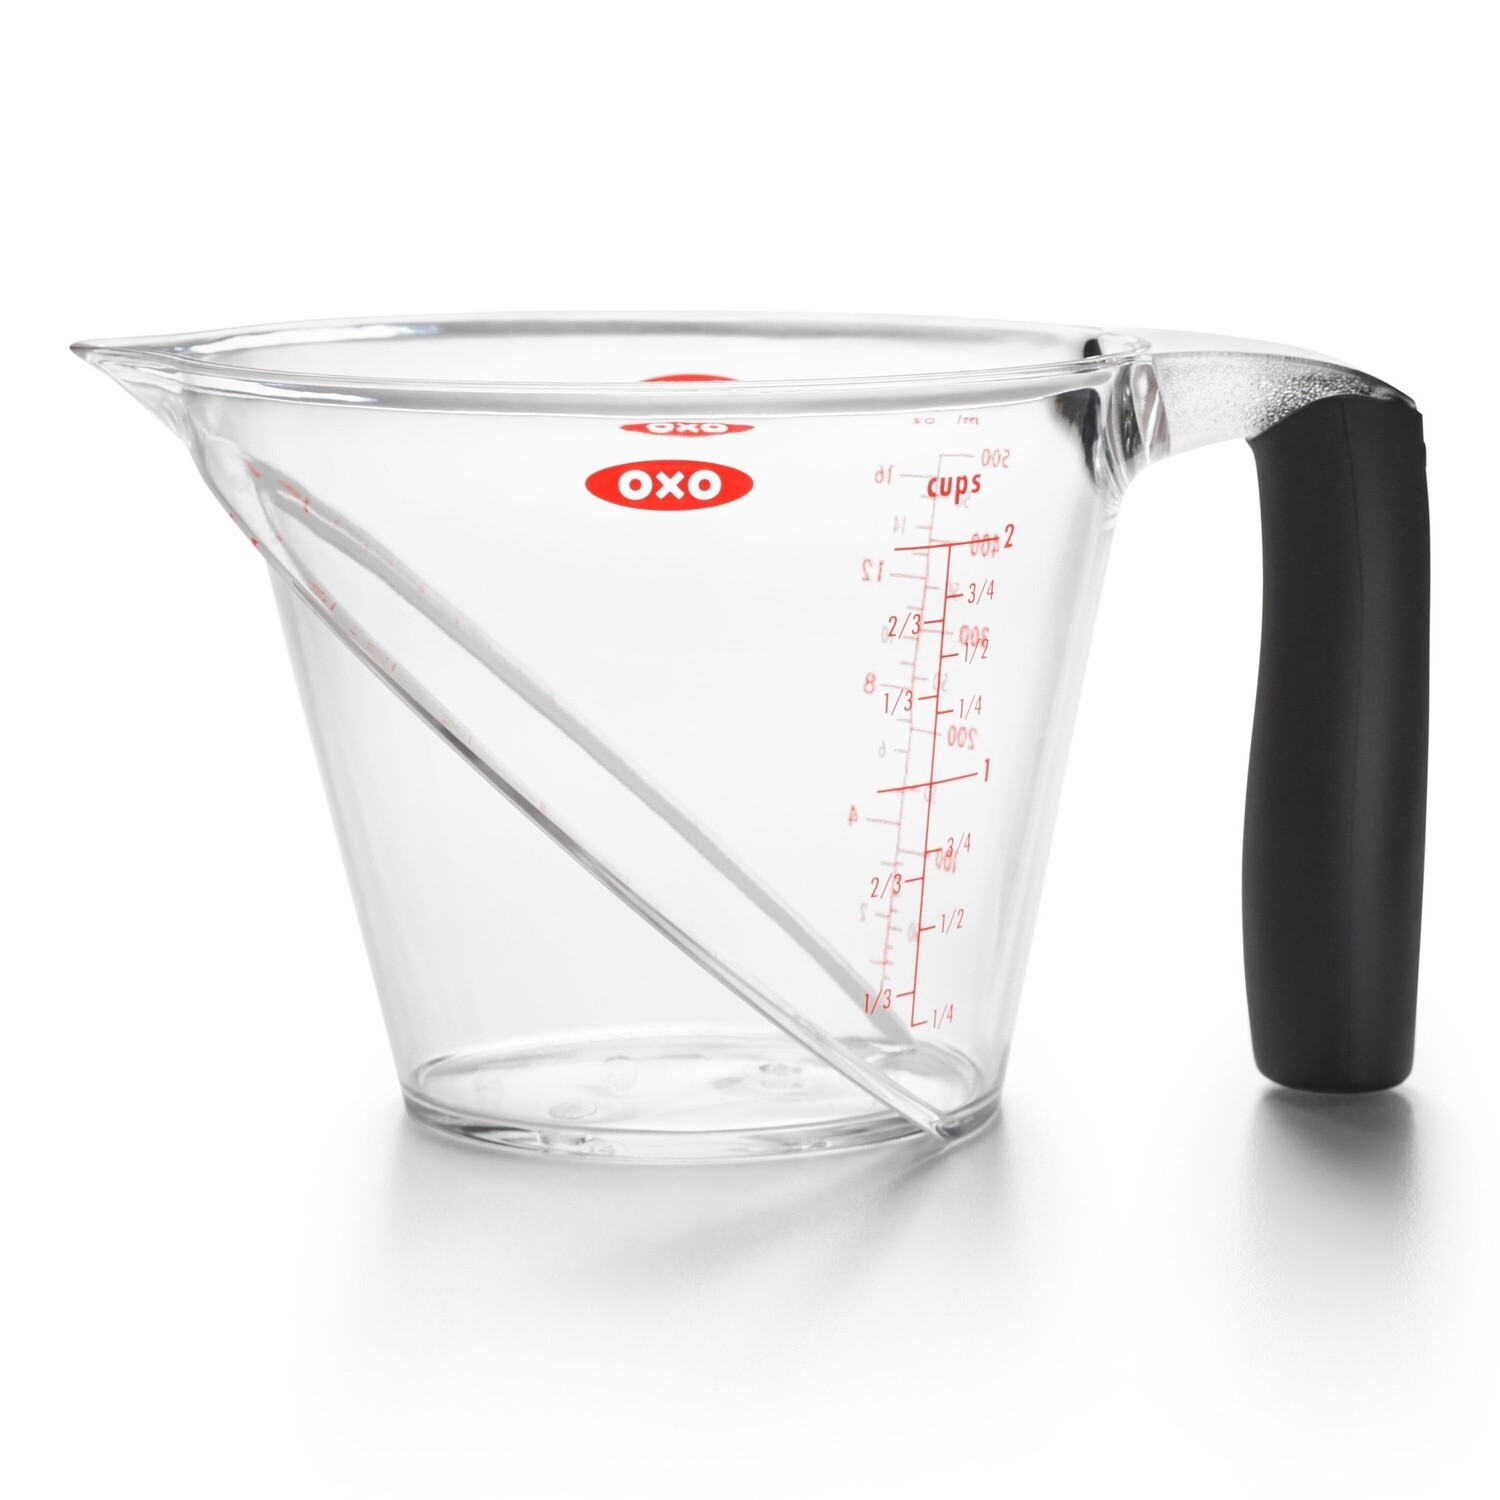 OXO Good Grips Measuring Cups, Volume: 2 CUP